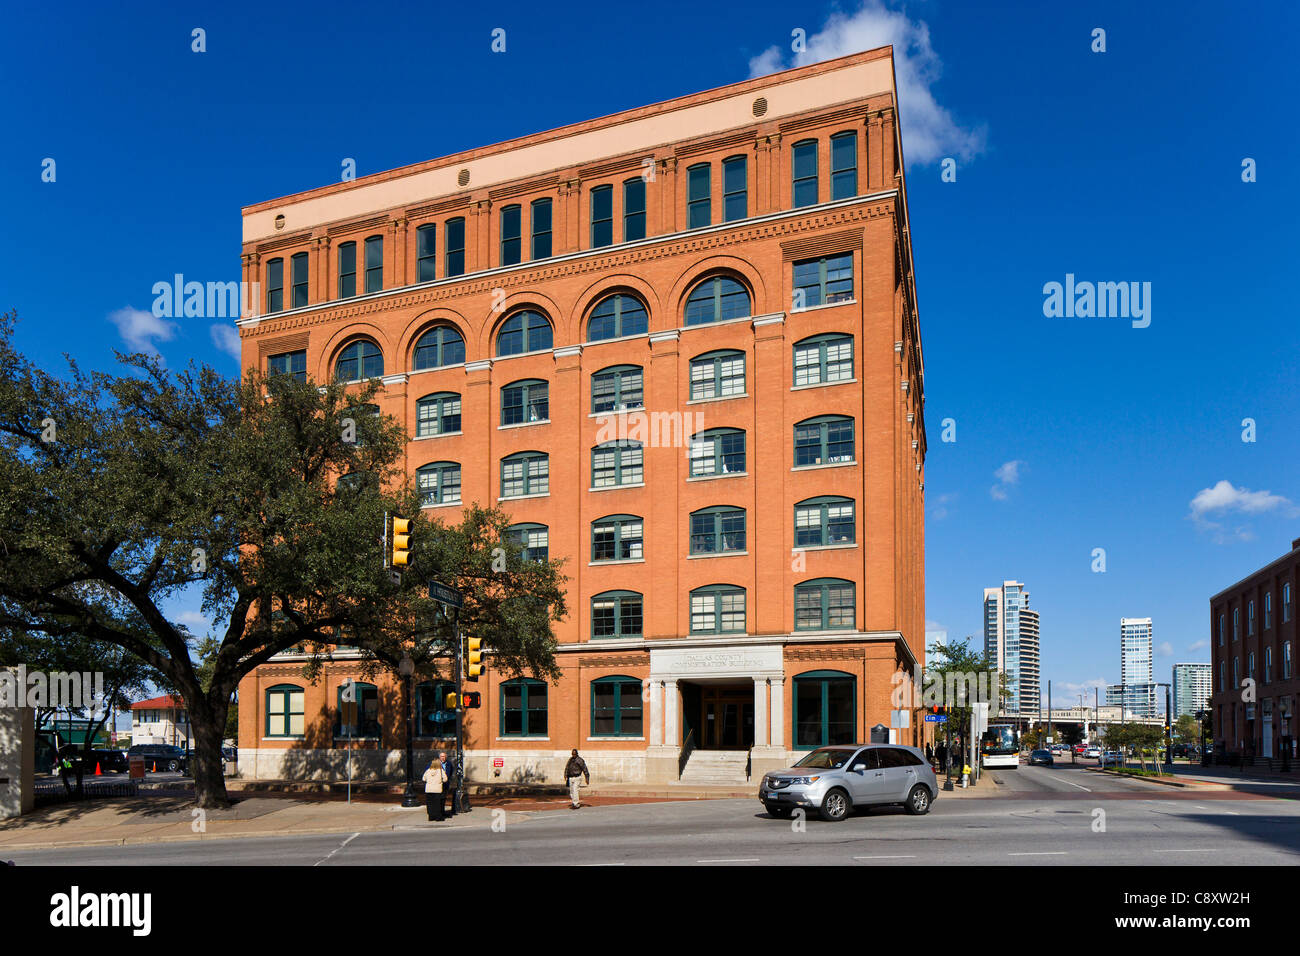 The Texas Schoolbook Depository from which Lee Harvey Oswald shot President John F Kennedy, Dealey Plaza, Dallas, Texas, USA Stock Photo